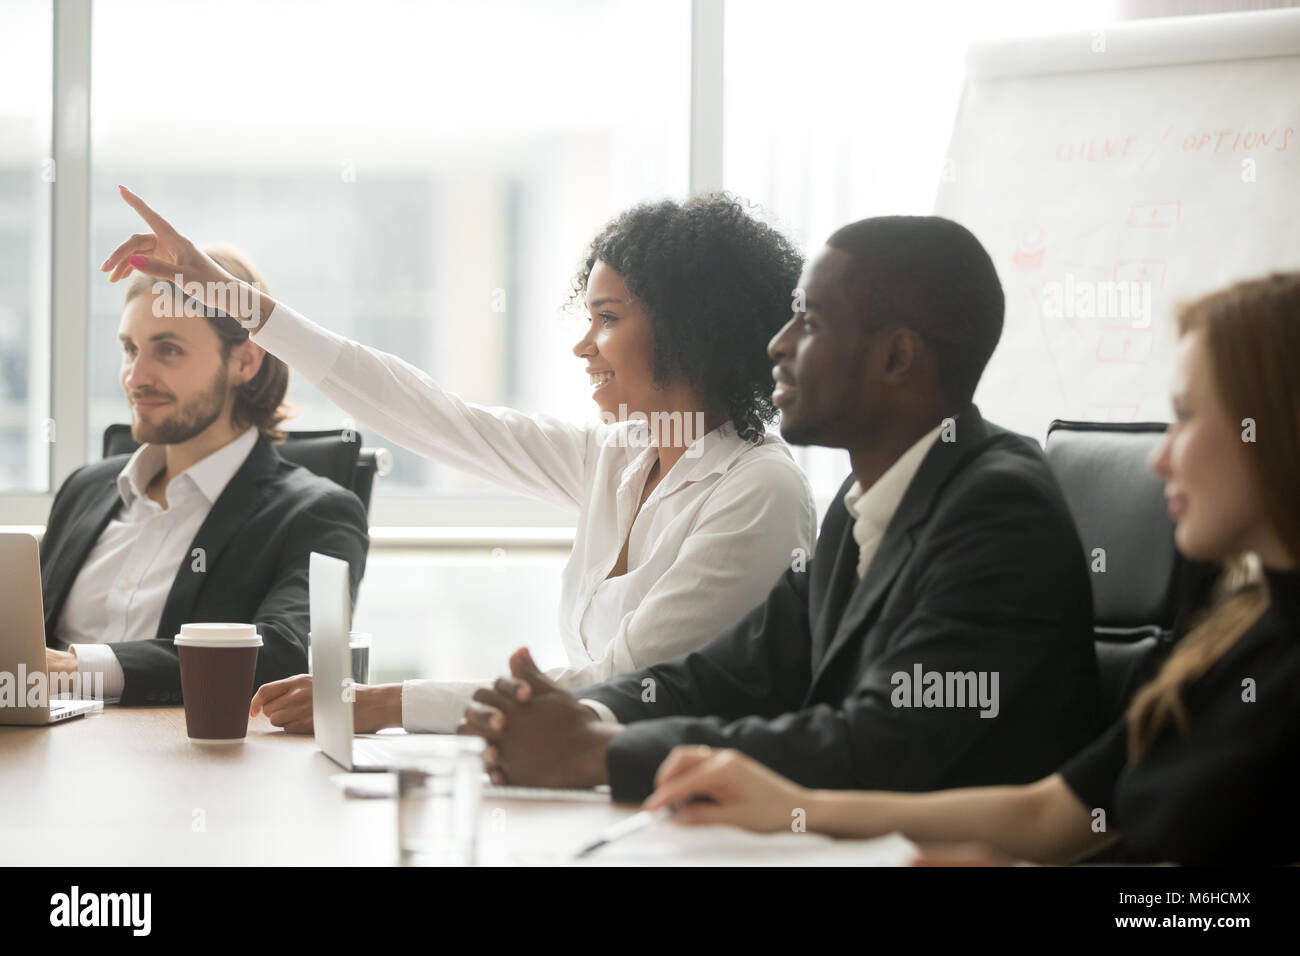 African woman raising hand to ask question at team training Stock Photo